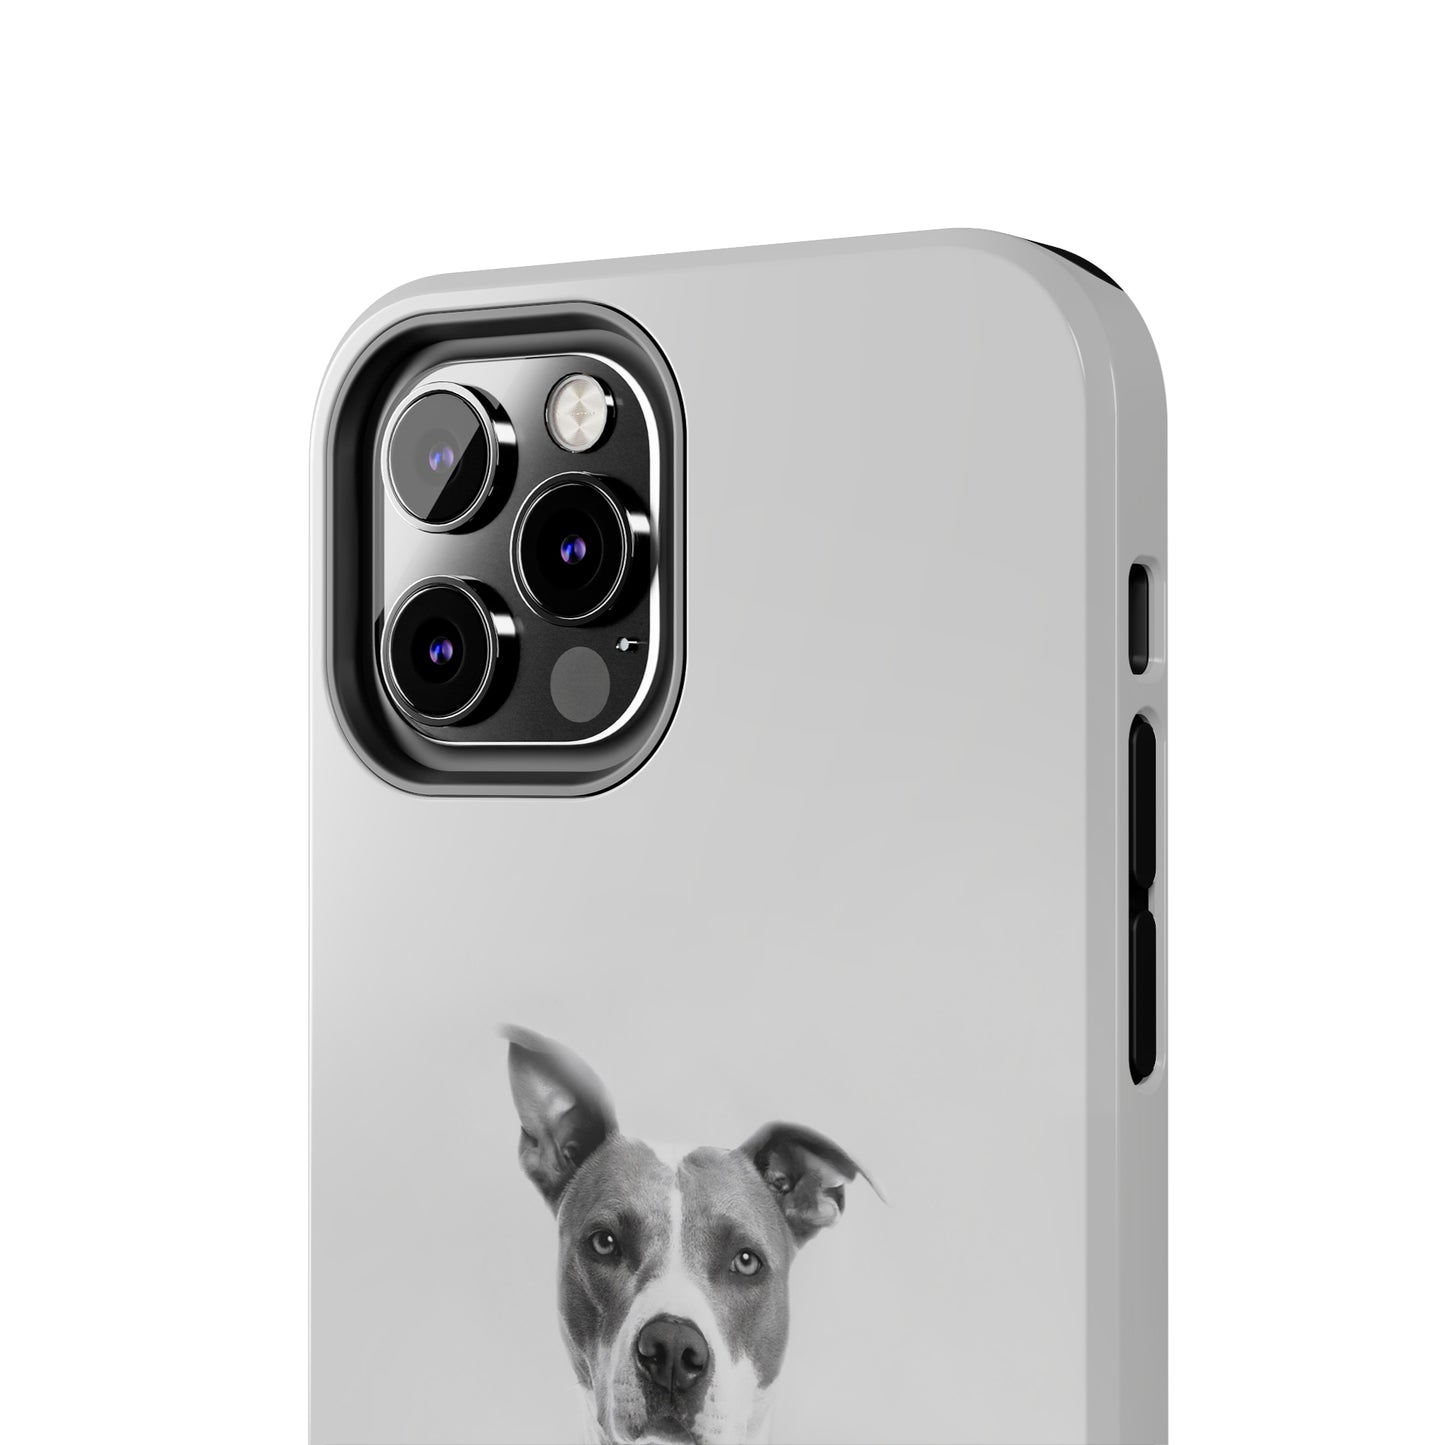 Protective iPhone Cases - Dog Man by Tegusuk